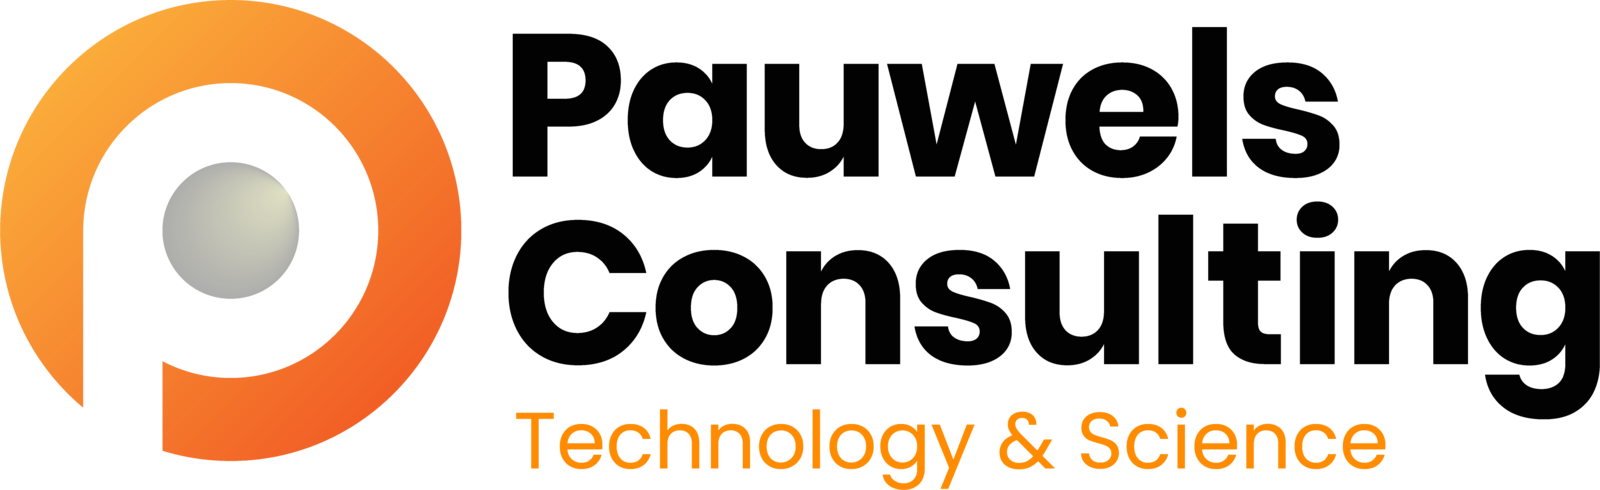 Pauwels Consulting logo